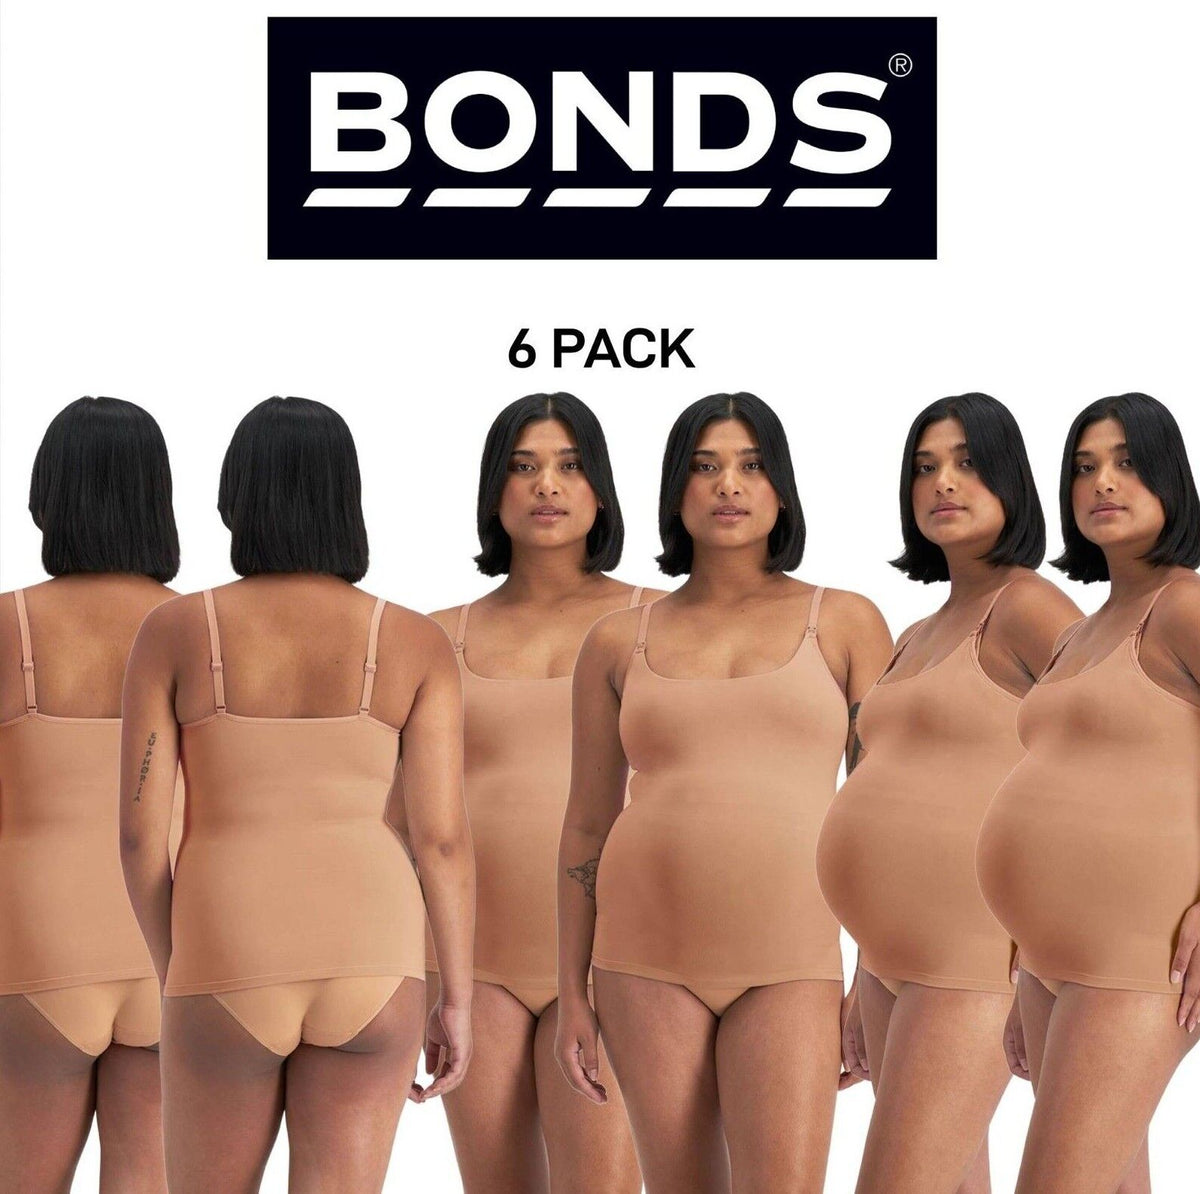 Bonds Womens Bases Maternity Scoop Singlet Soft and Comfy Support 6 Pack YWU9